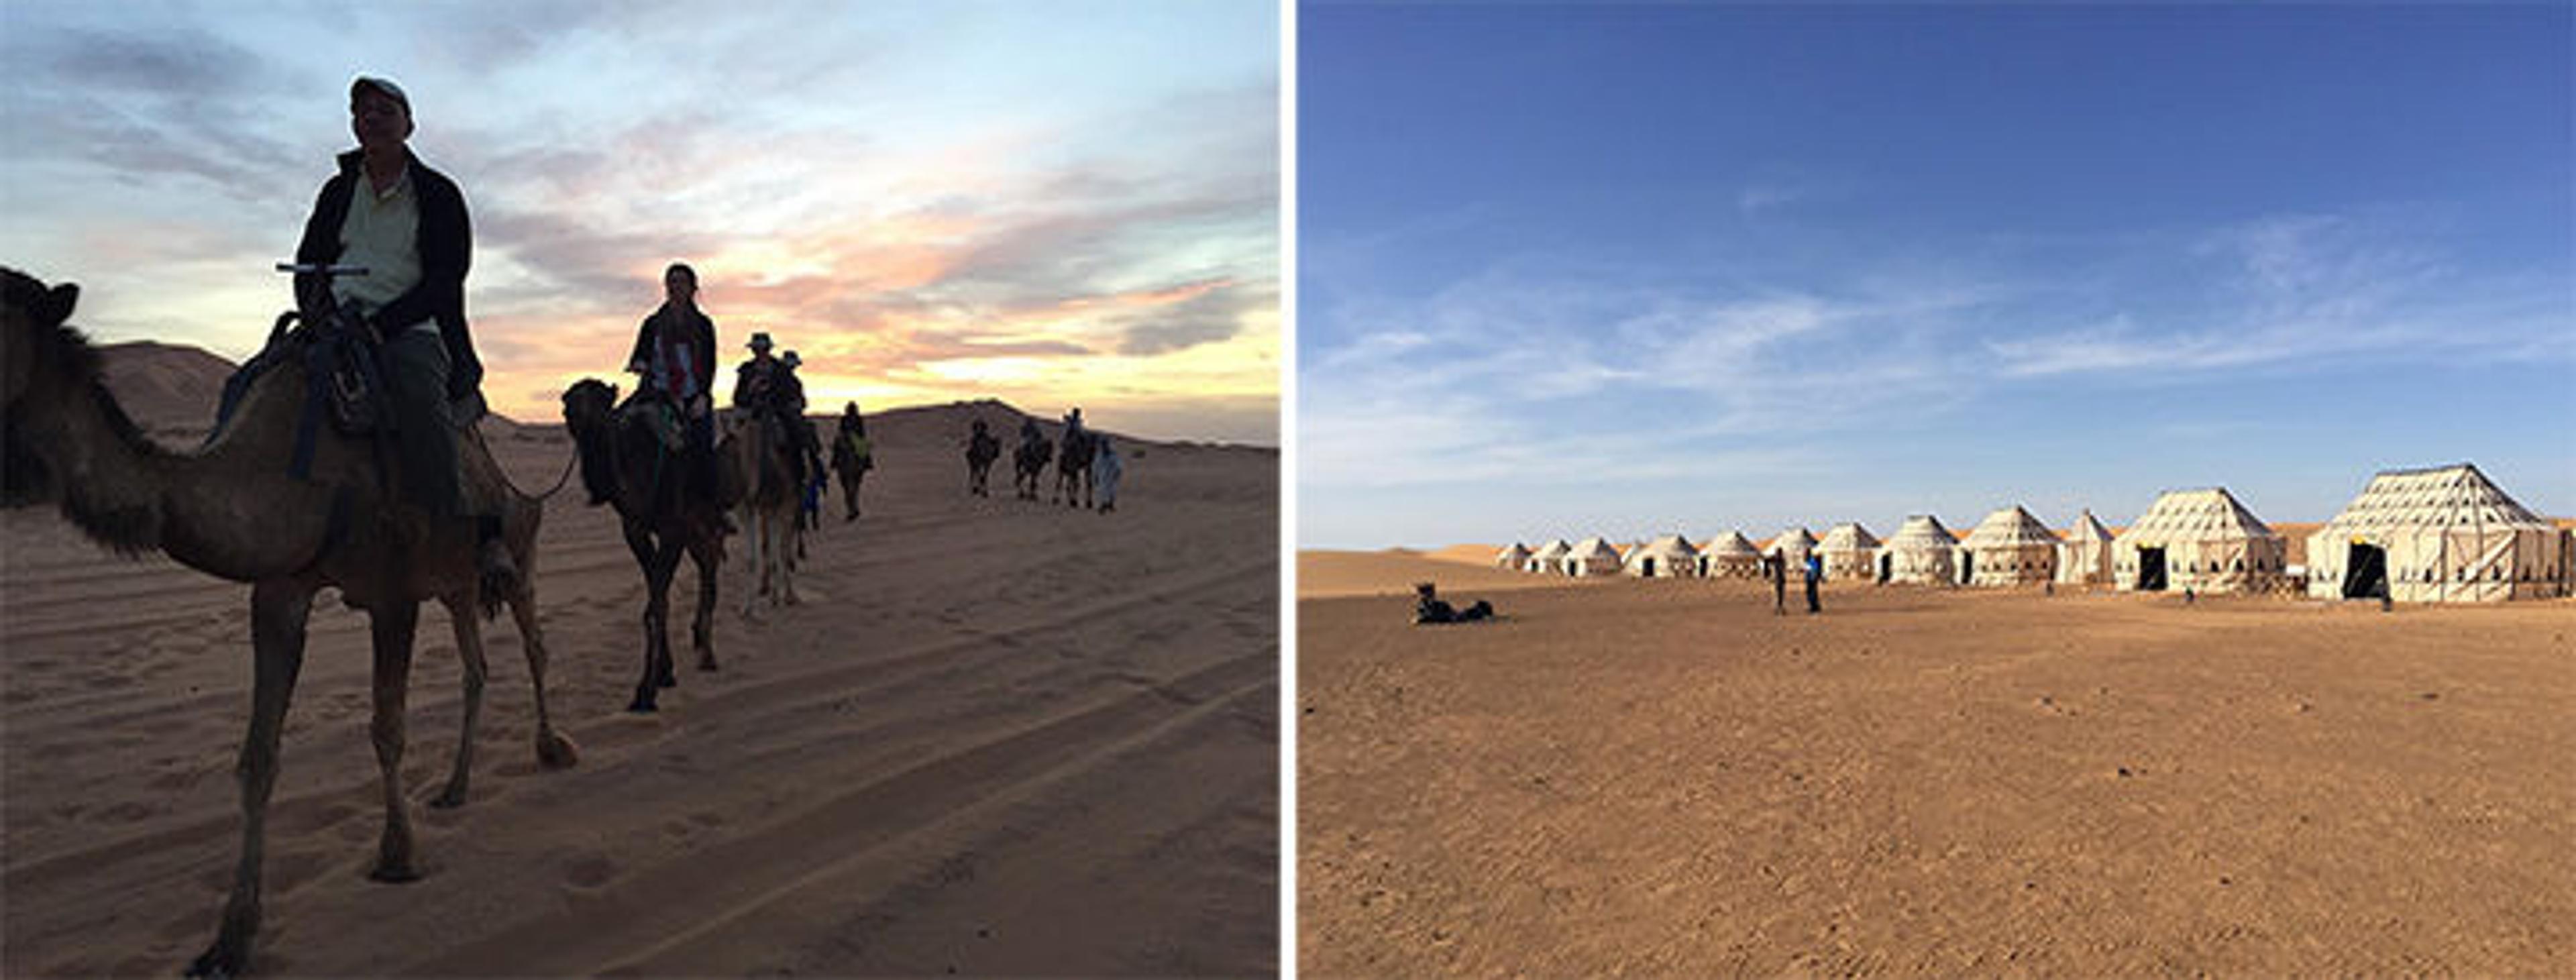 Left: Riding camelback at sunset; Right: Tents in the desert